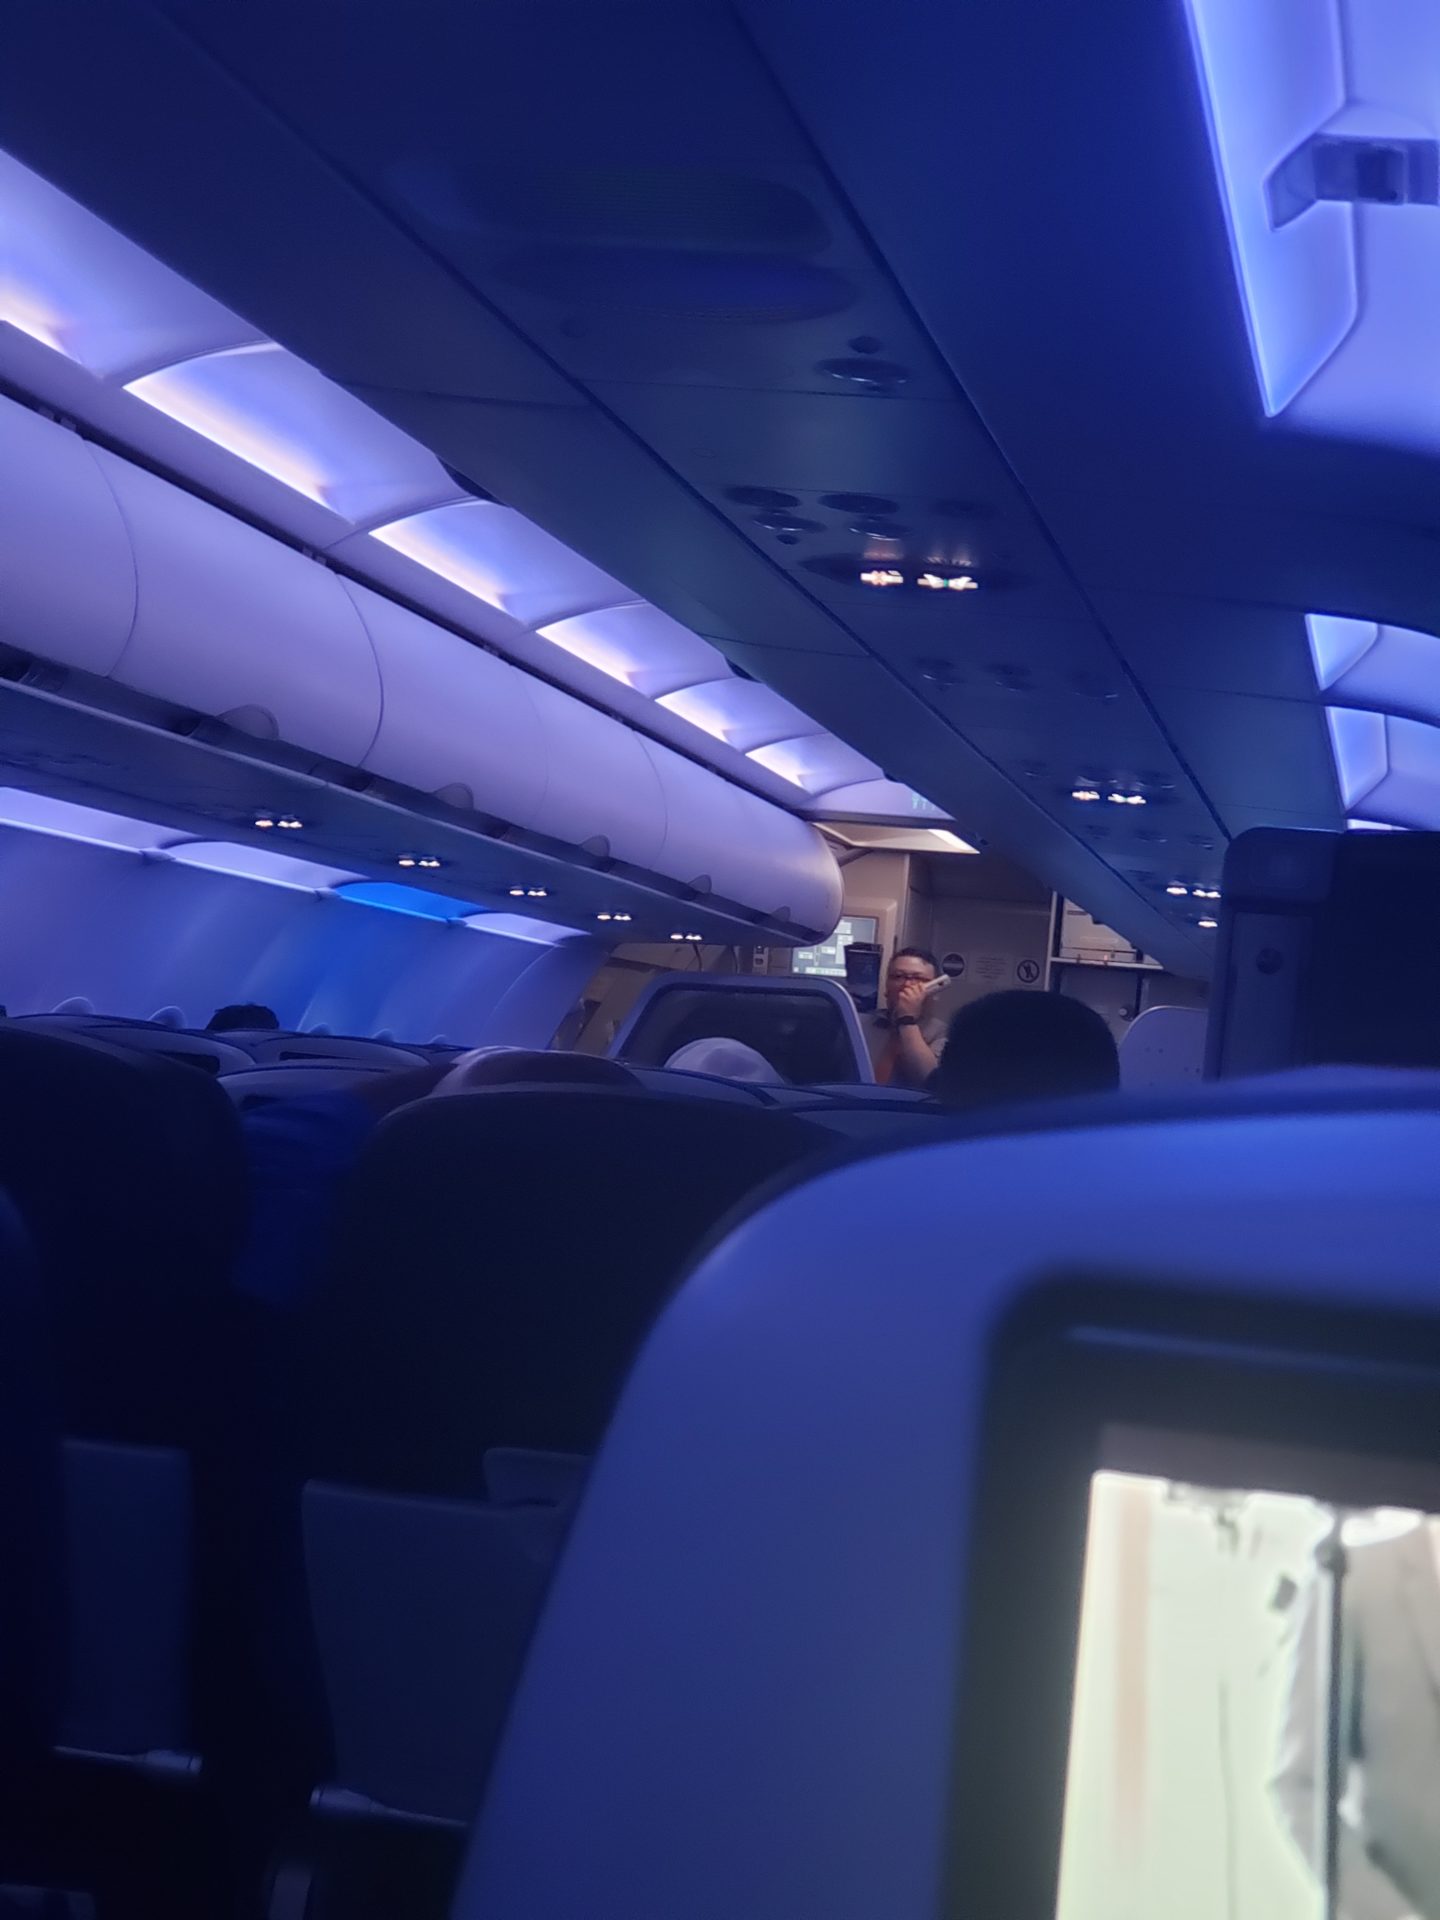 inside an airplane with a man standing in the back